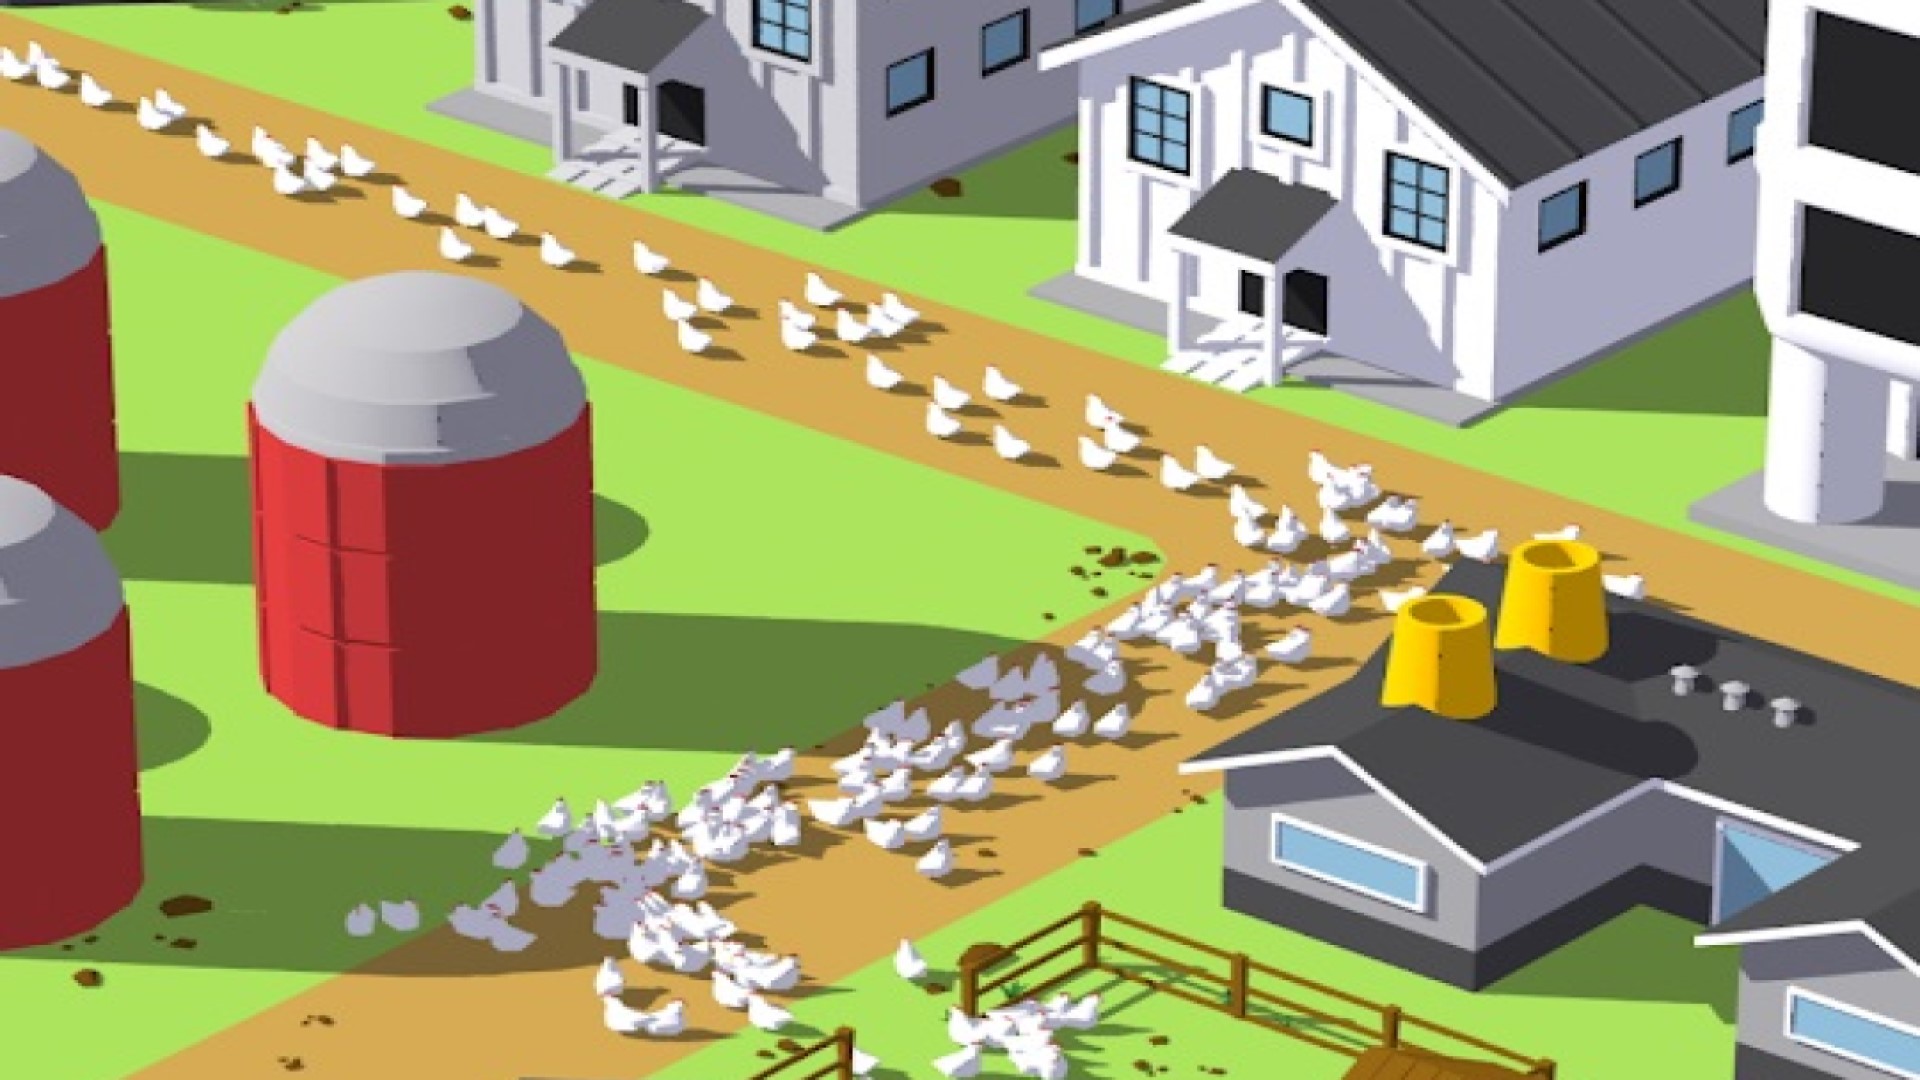 Best idle games: Egg inc. Image shows an isometric view of a farm with loads of chickens in it.